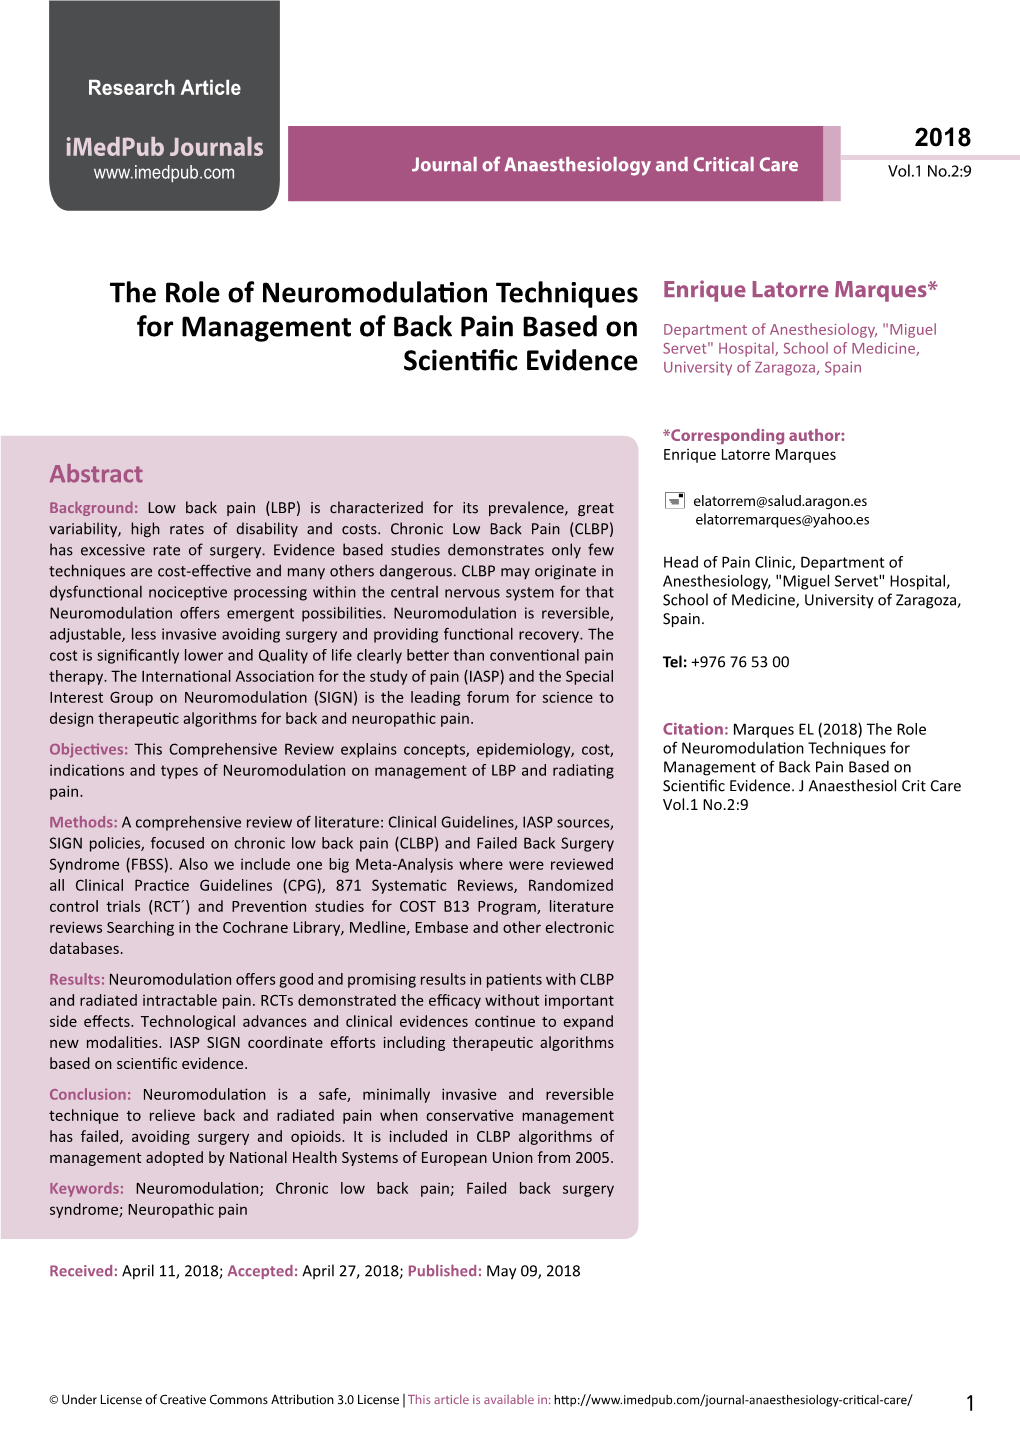 The Role of Neuromodulation Techniques for Management Of